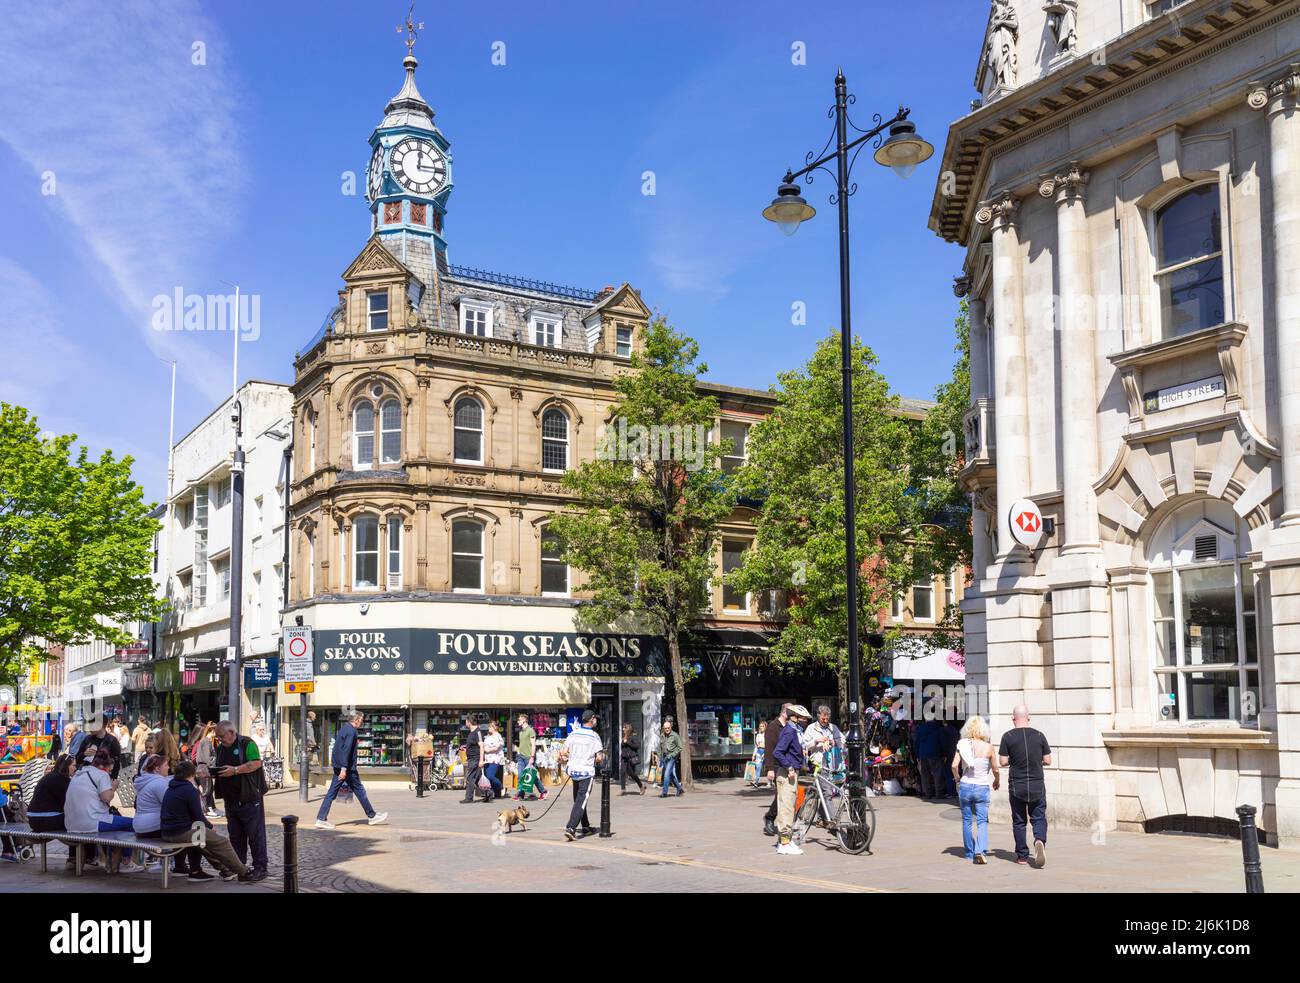 Doncaster town centre with shoppers on the High street in the town centre of Doncaster South Yorkshire England UK GB Europe Stock Photo